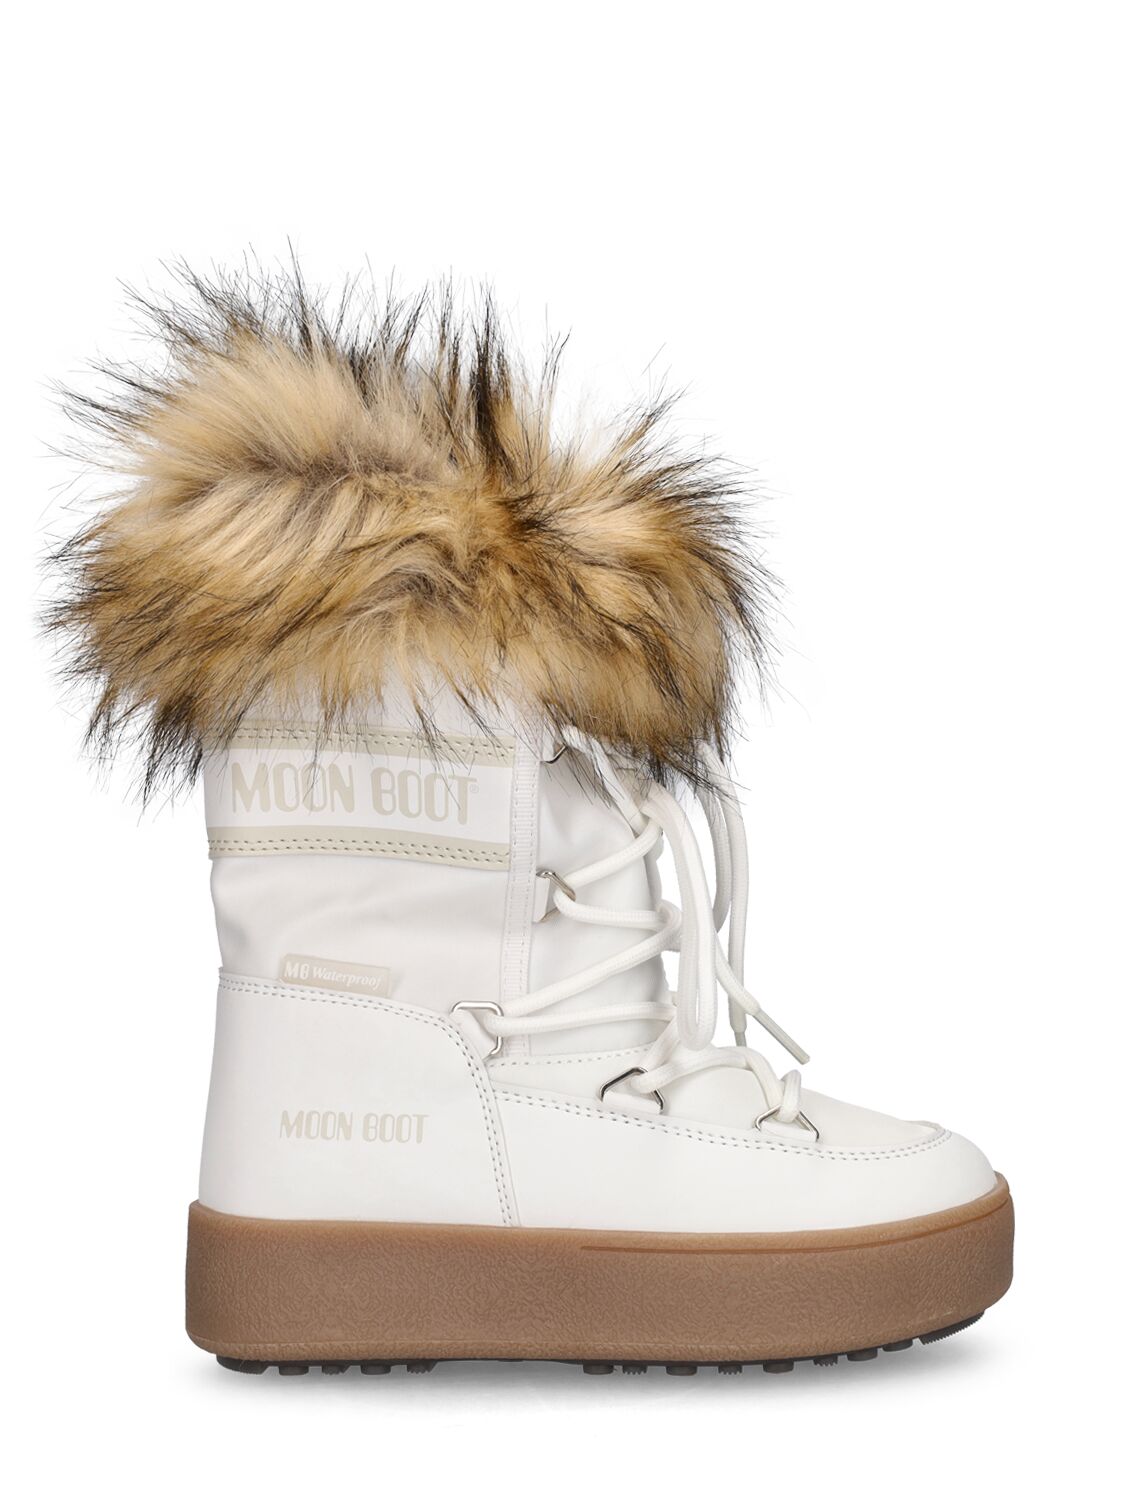 Moon Boot Kids' Nylon Ankle Snow Boots W/ Faux Fur In White